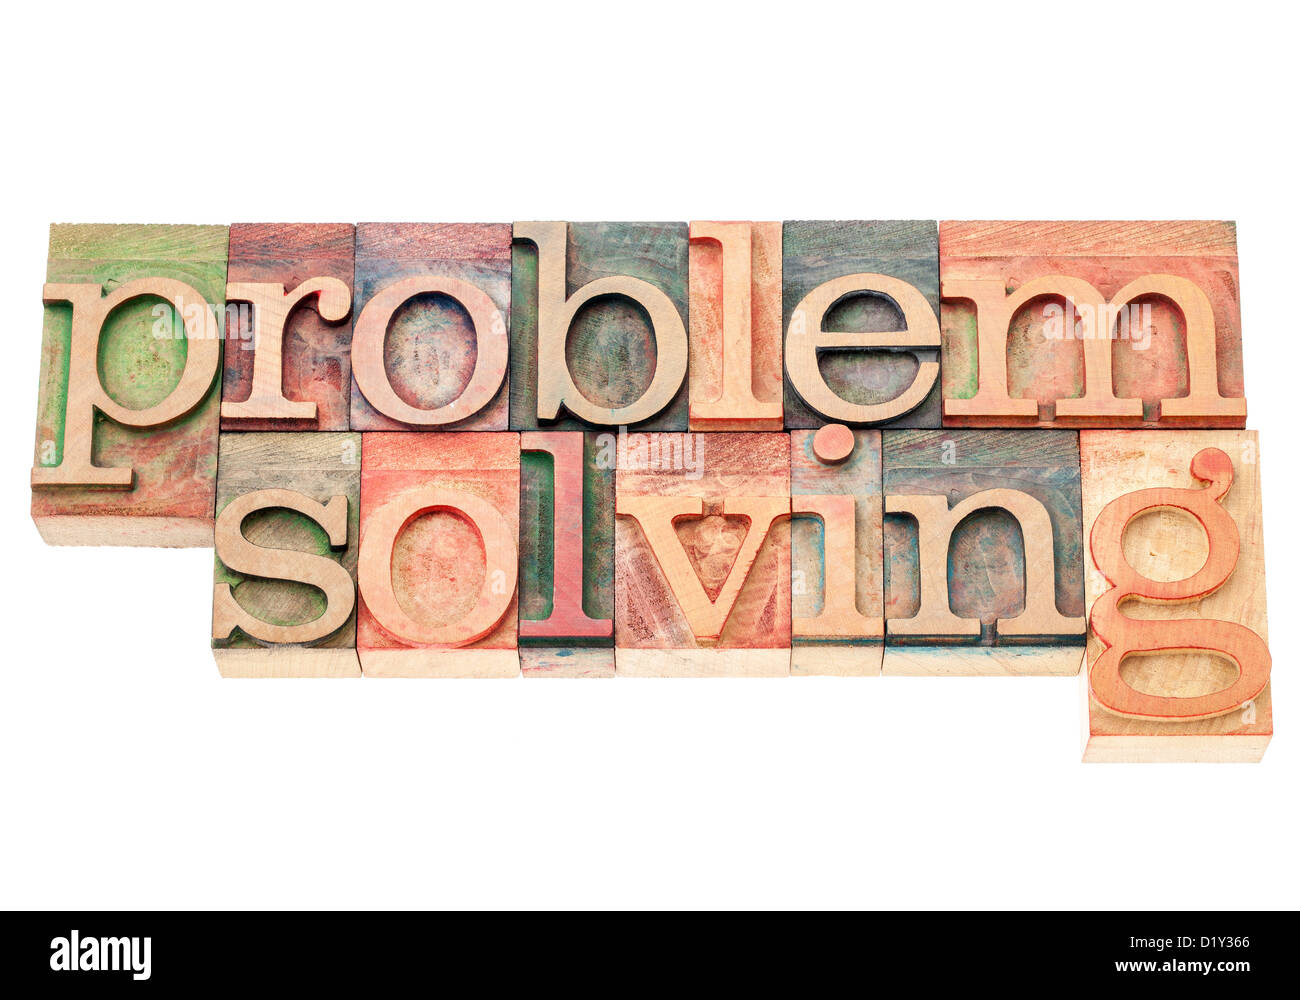 problem solving - isolated words in vintage letterpress wood type printing blocks Stock Photo